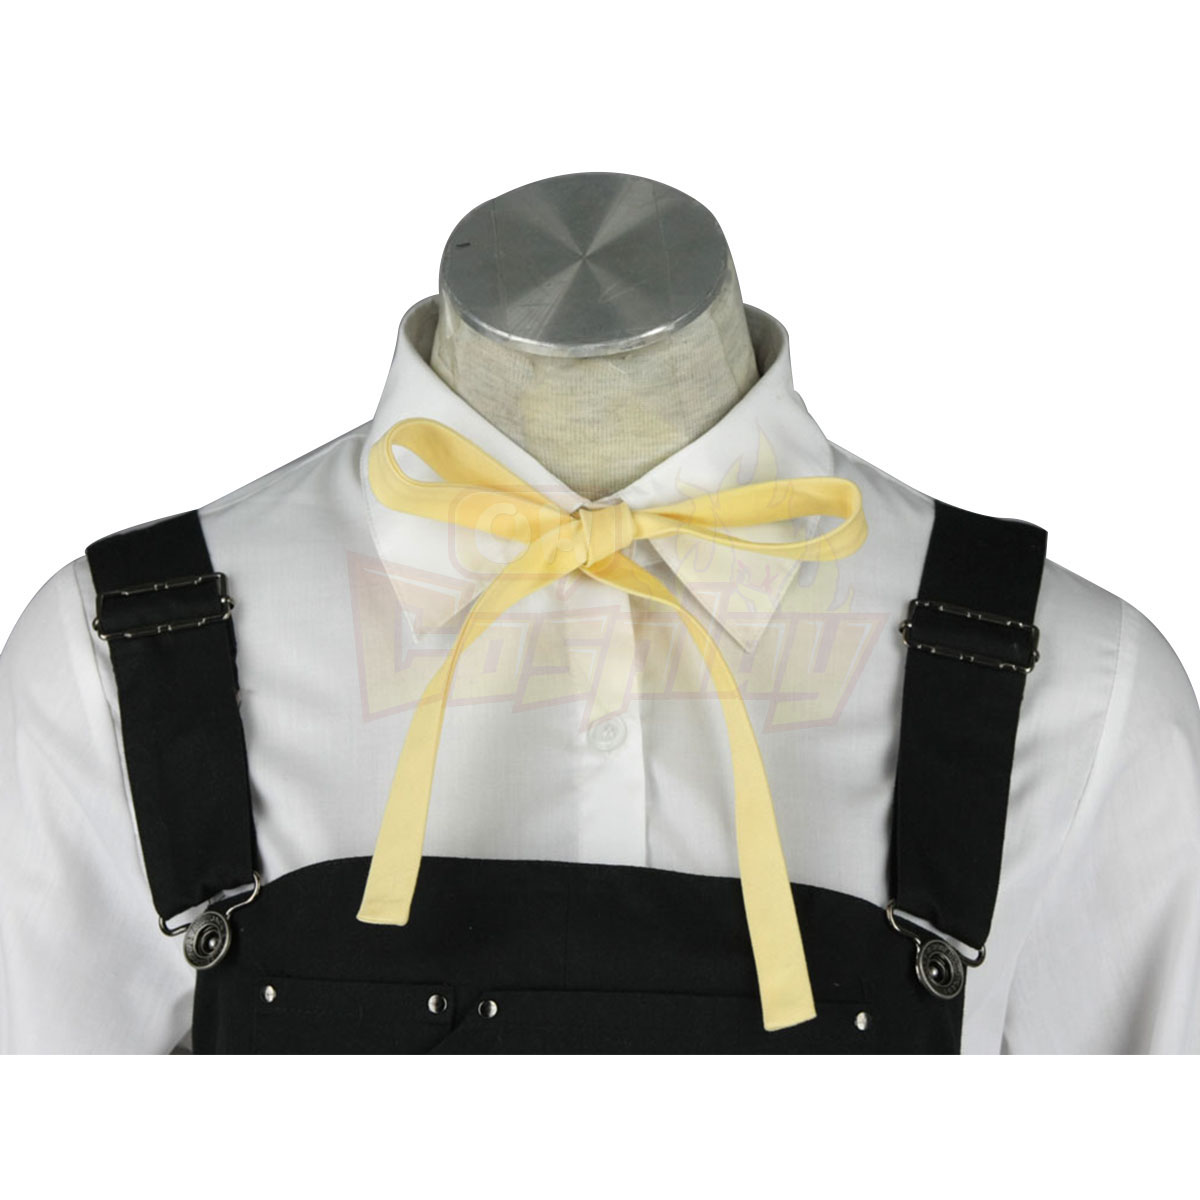 Vocaloid Kagamine Rin 6TH Cosplay Costumes UK